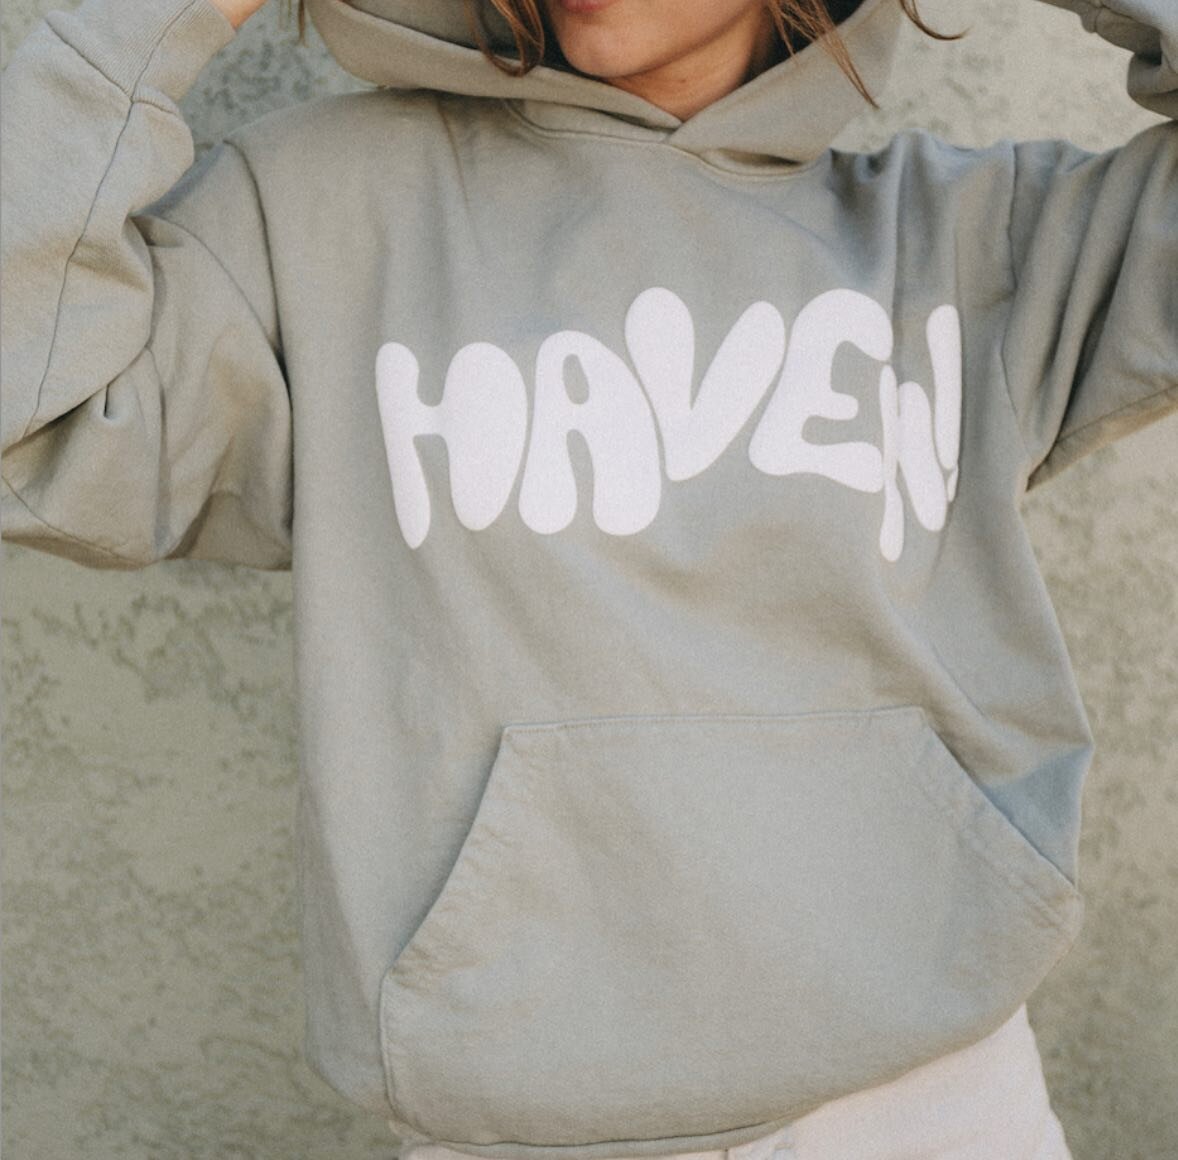 so much love for @haventhepodcast 🫶🏻 

also if you need merch added on to your branding project, i have some great hookups 👀